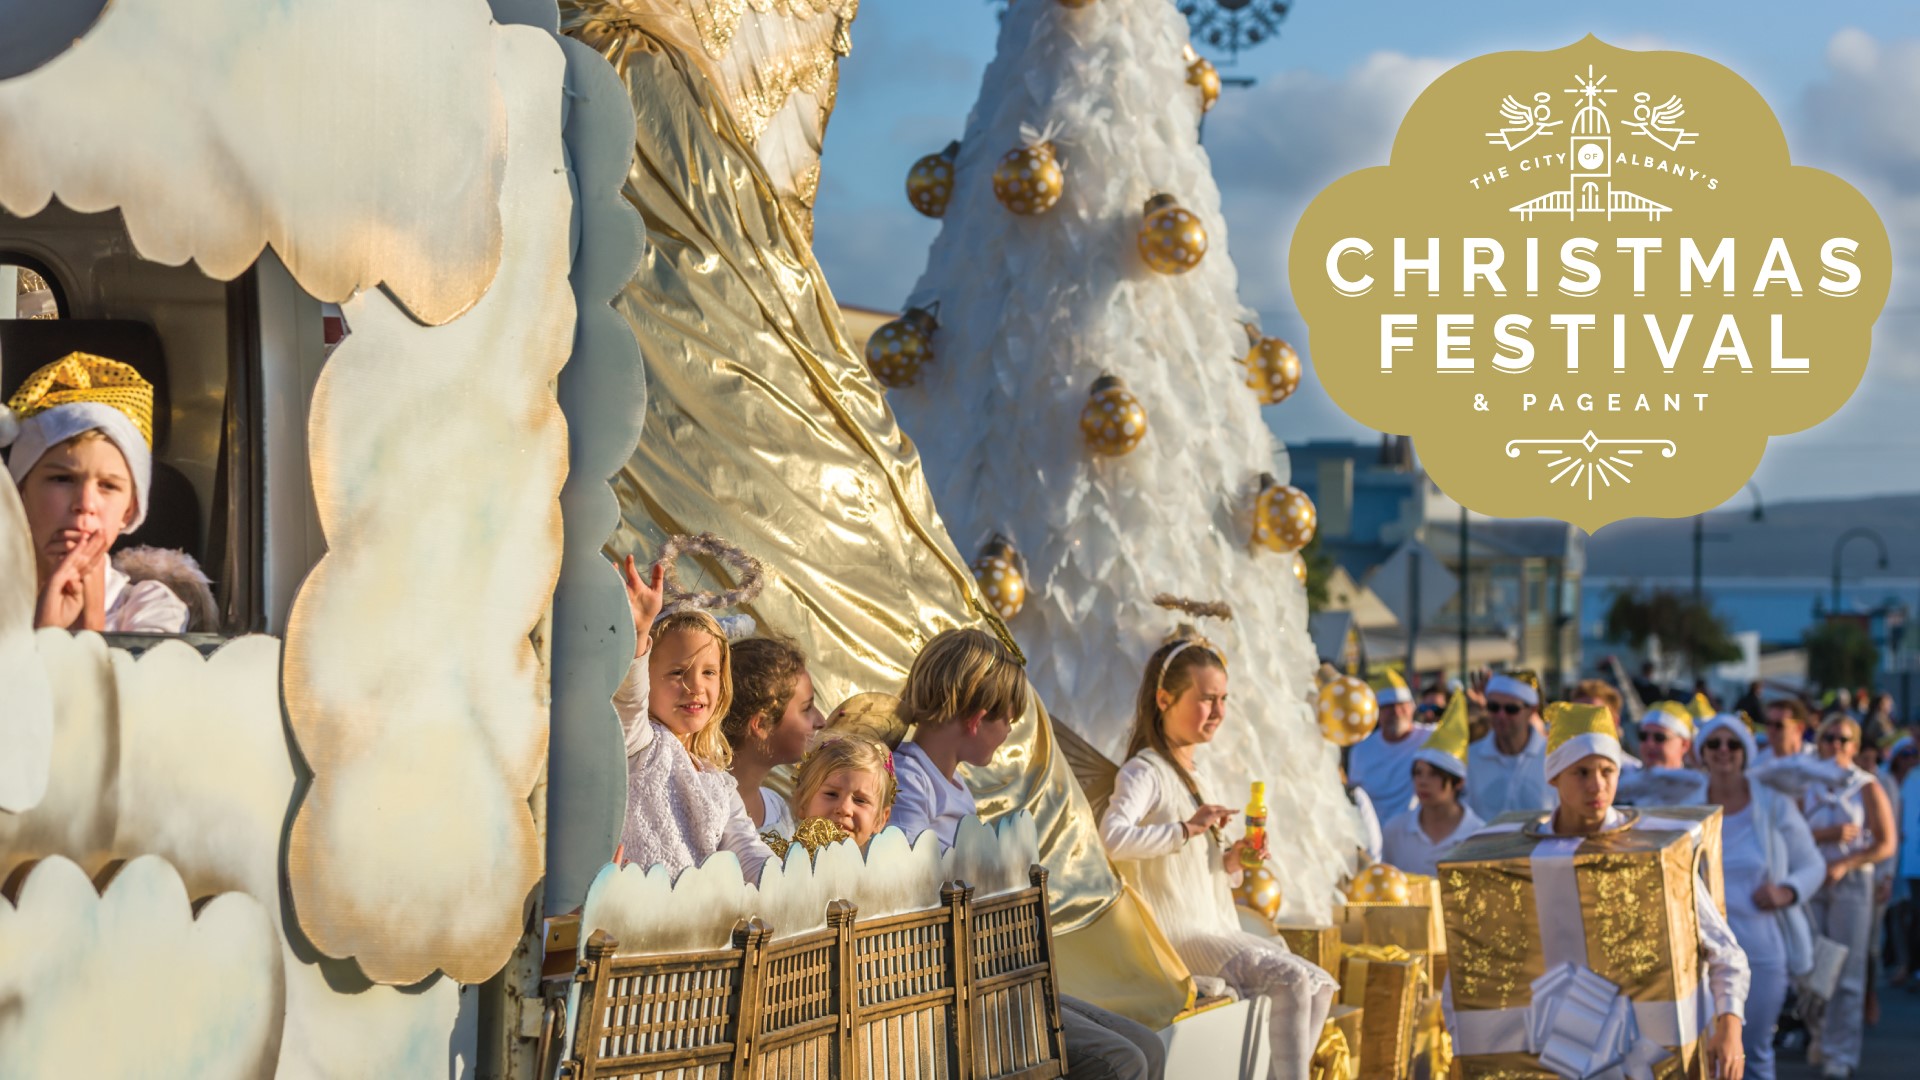 Christmas Festival and Pageant